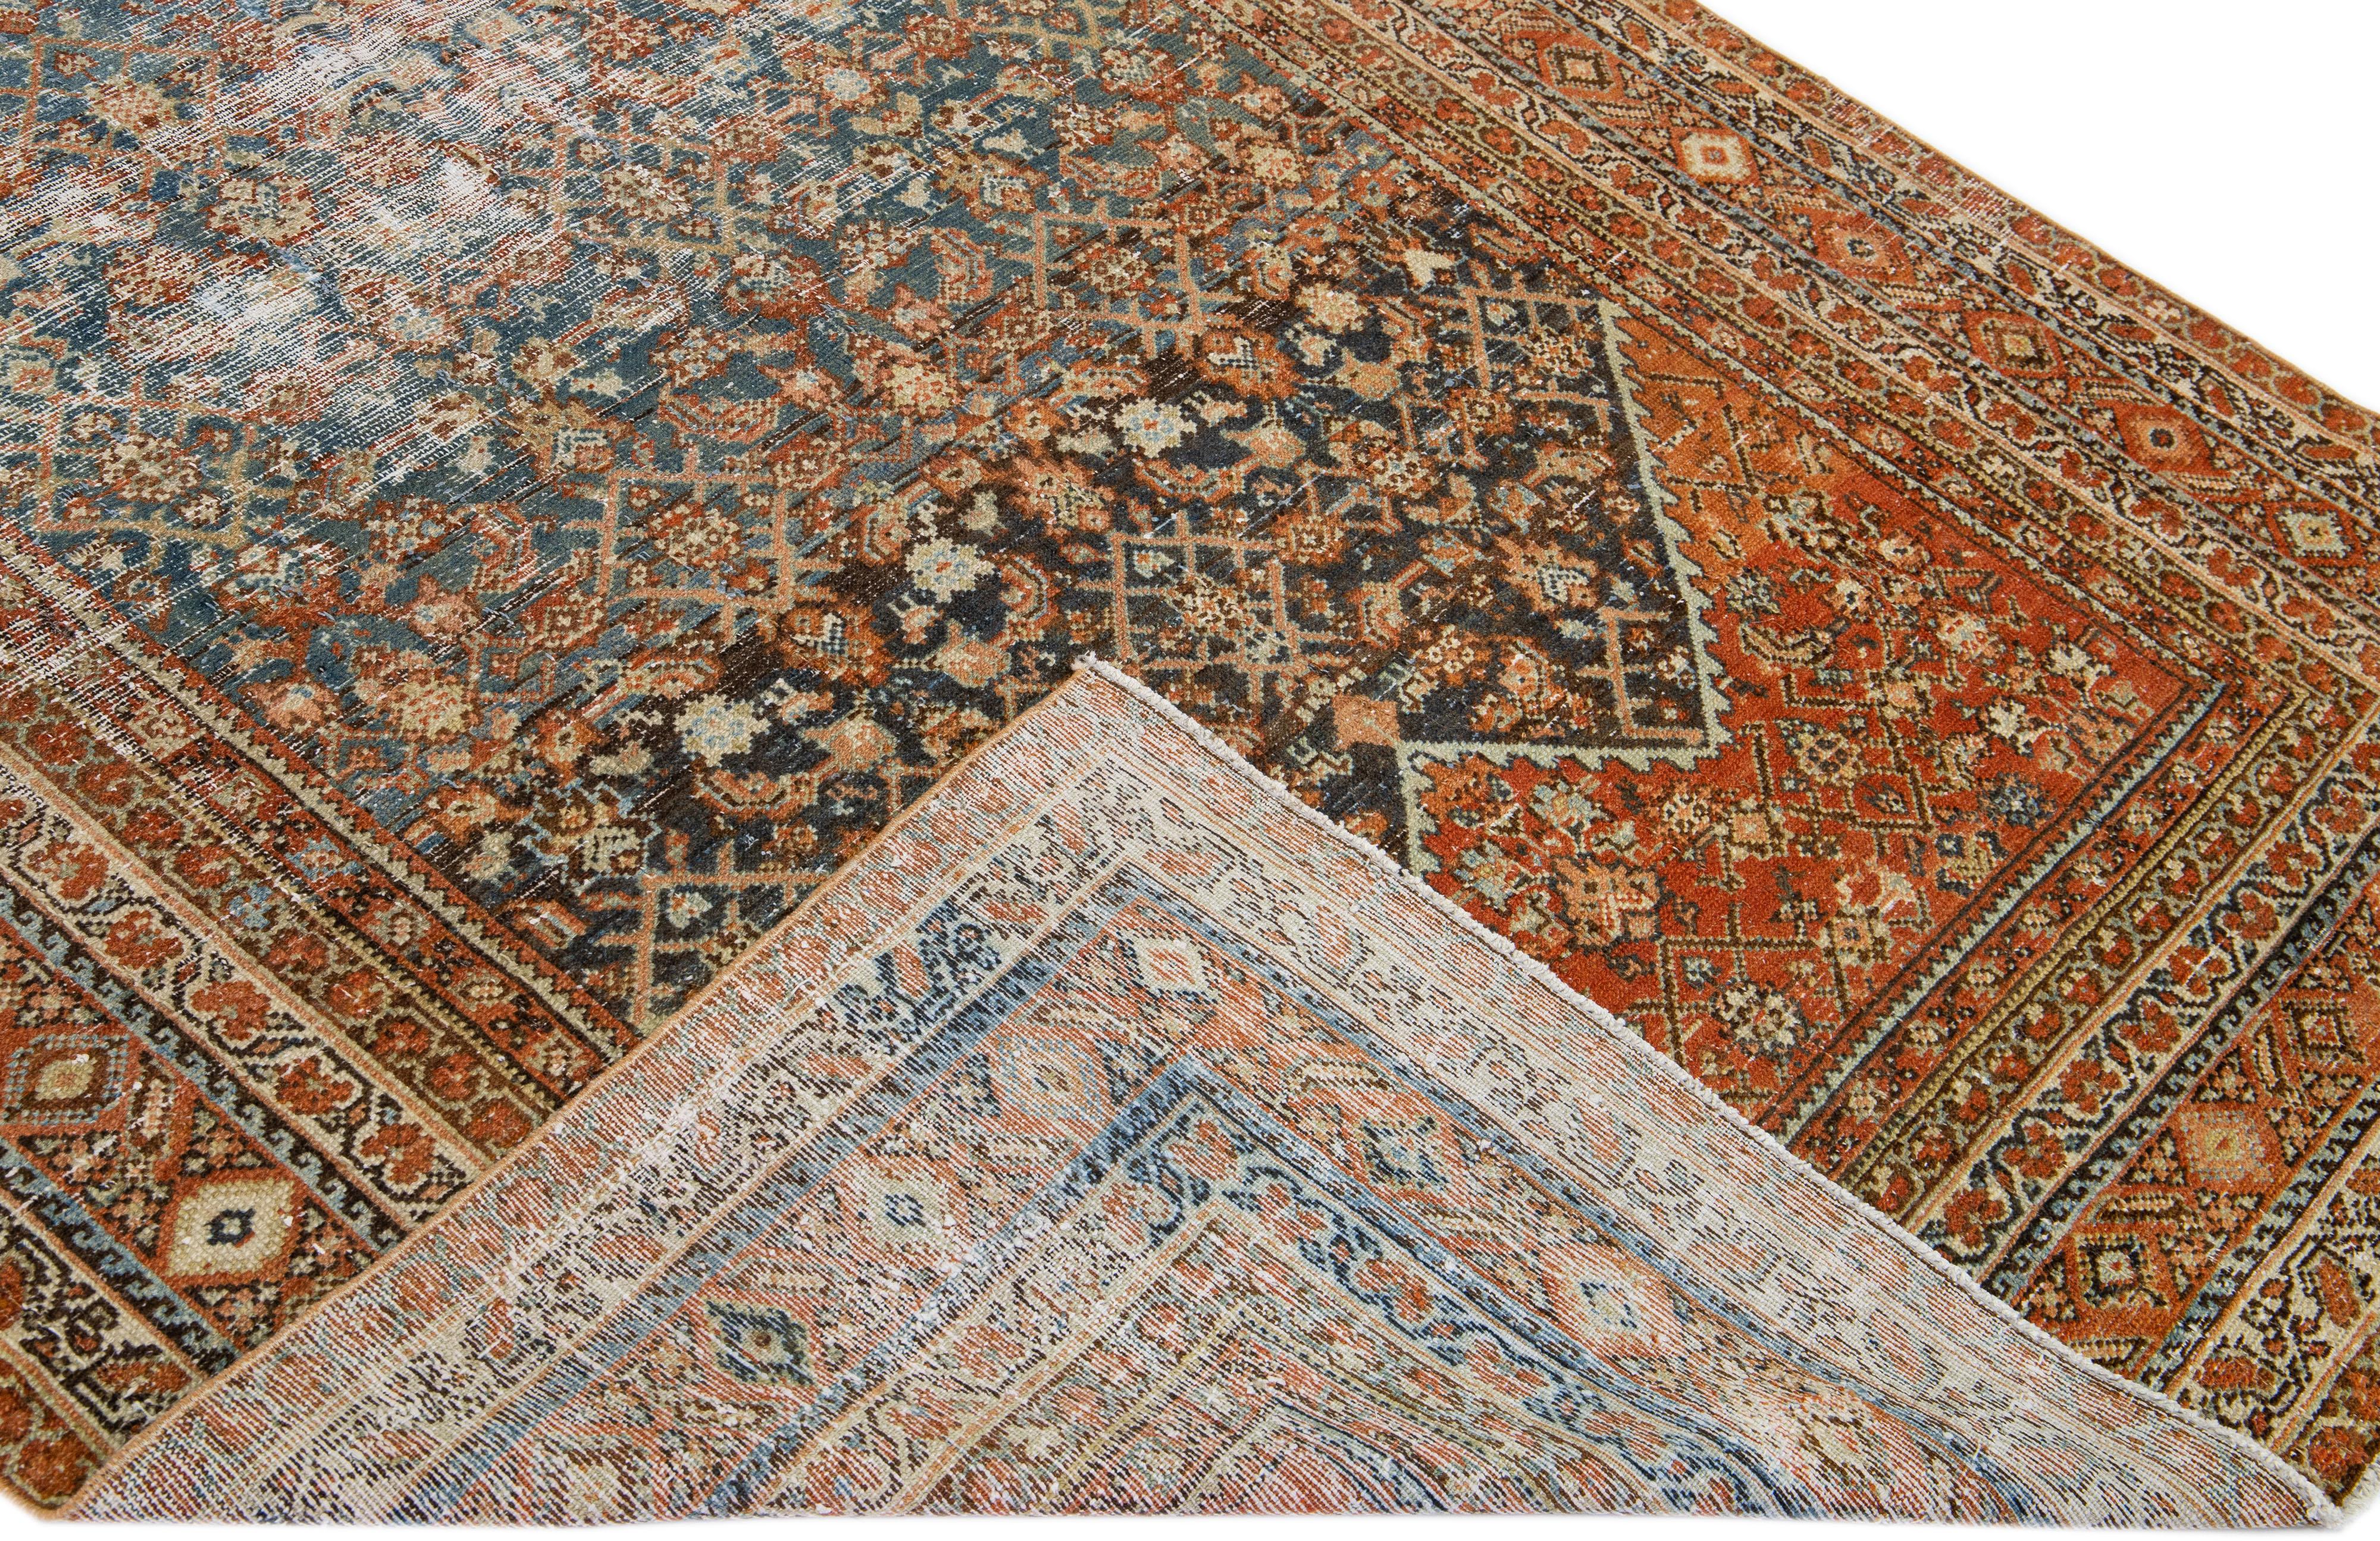 Beautiful antique Malayer hand-knotted wool rug with a blue field. This Persian piece has orange-rust and brown accent colors in a gorgeous all-over floral design.

This rug measures: 5'9